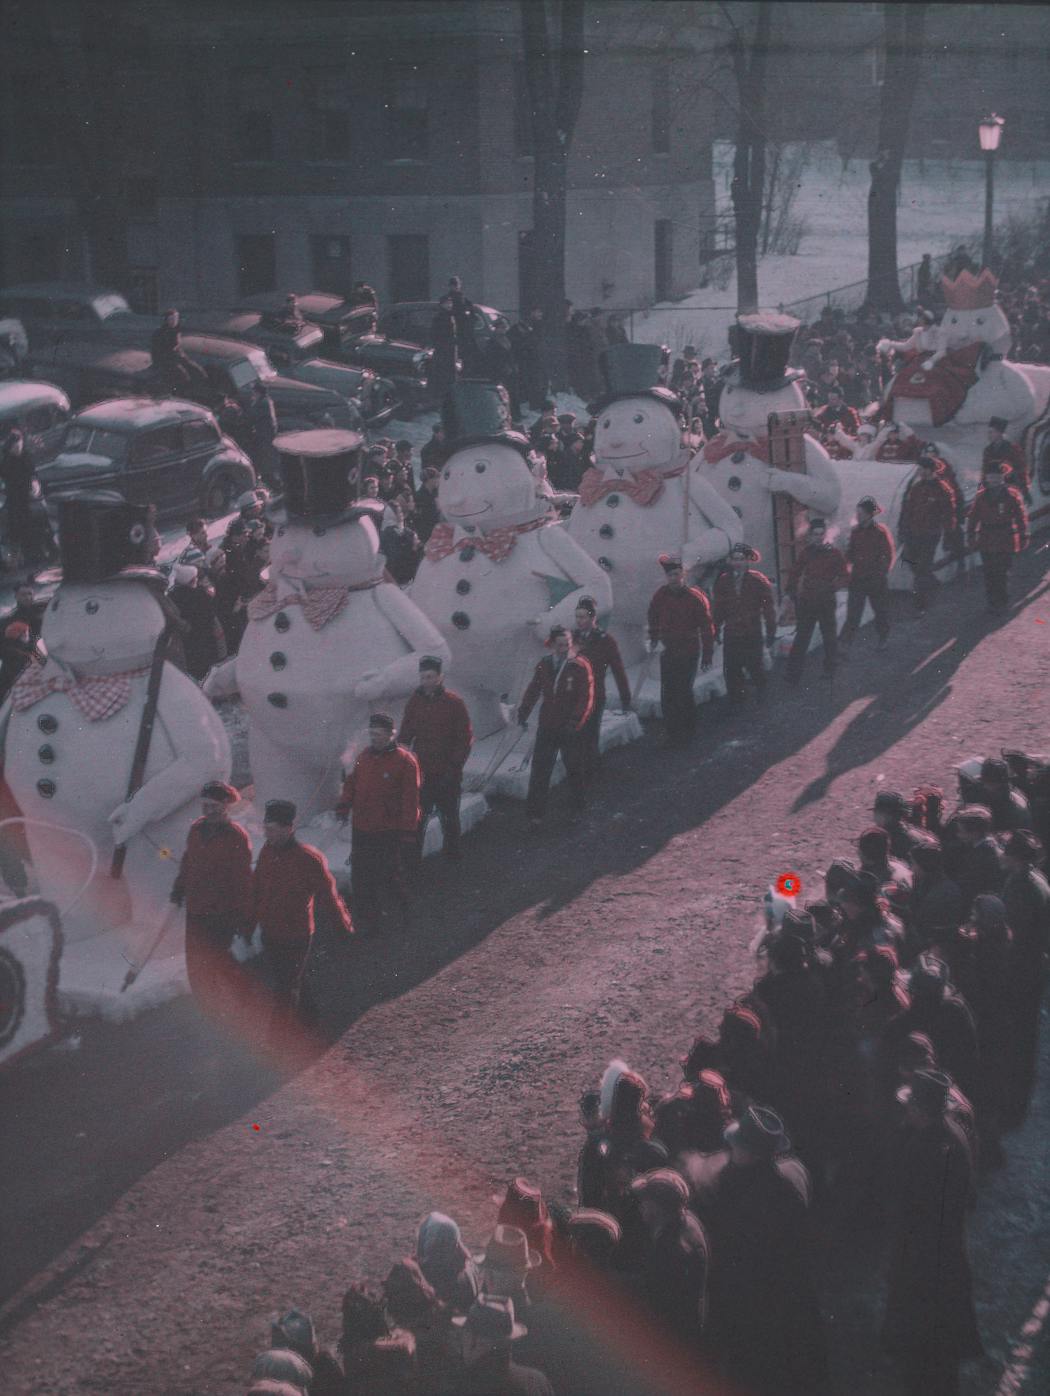 William Snell took photos of the 1940 St. Paul Winter Carnival as part of his job selling a color film process.